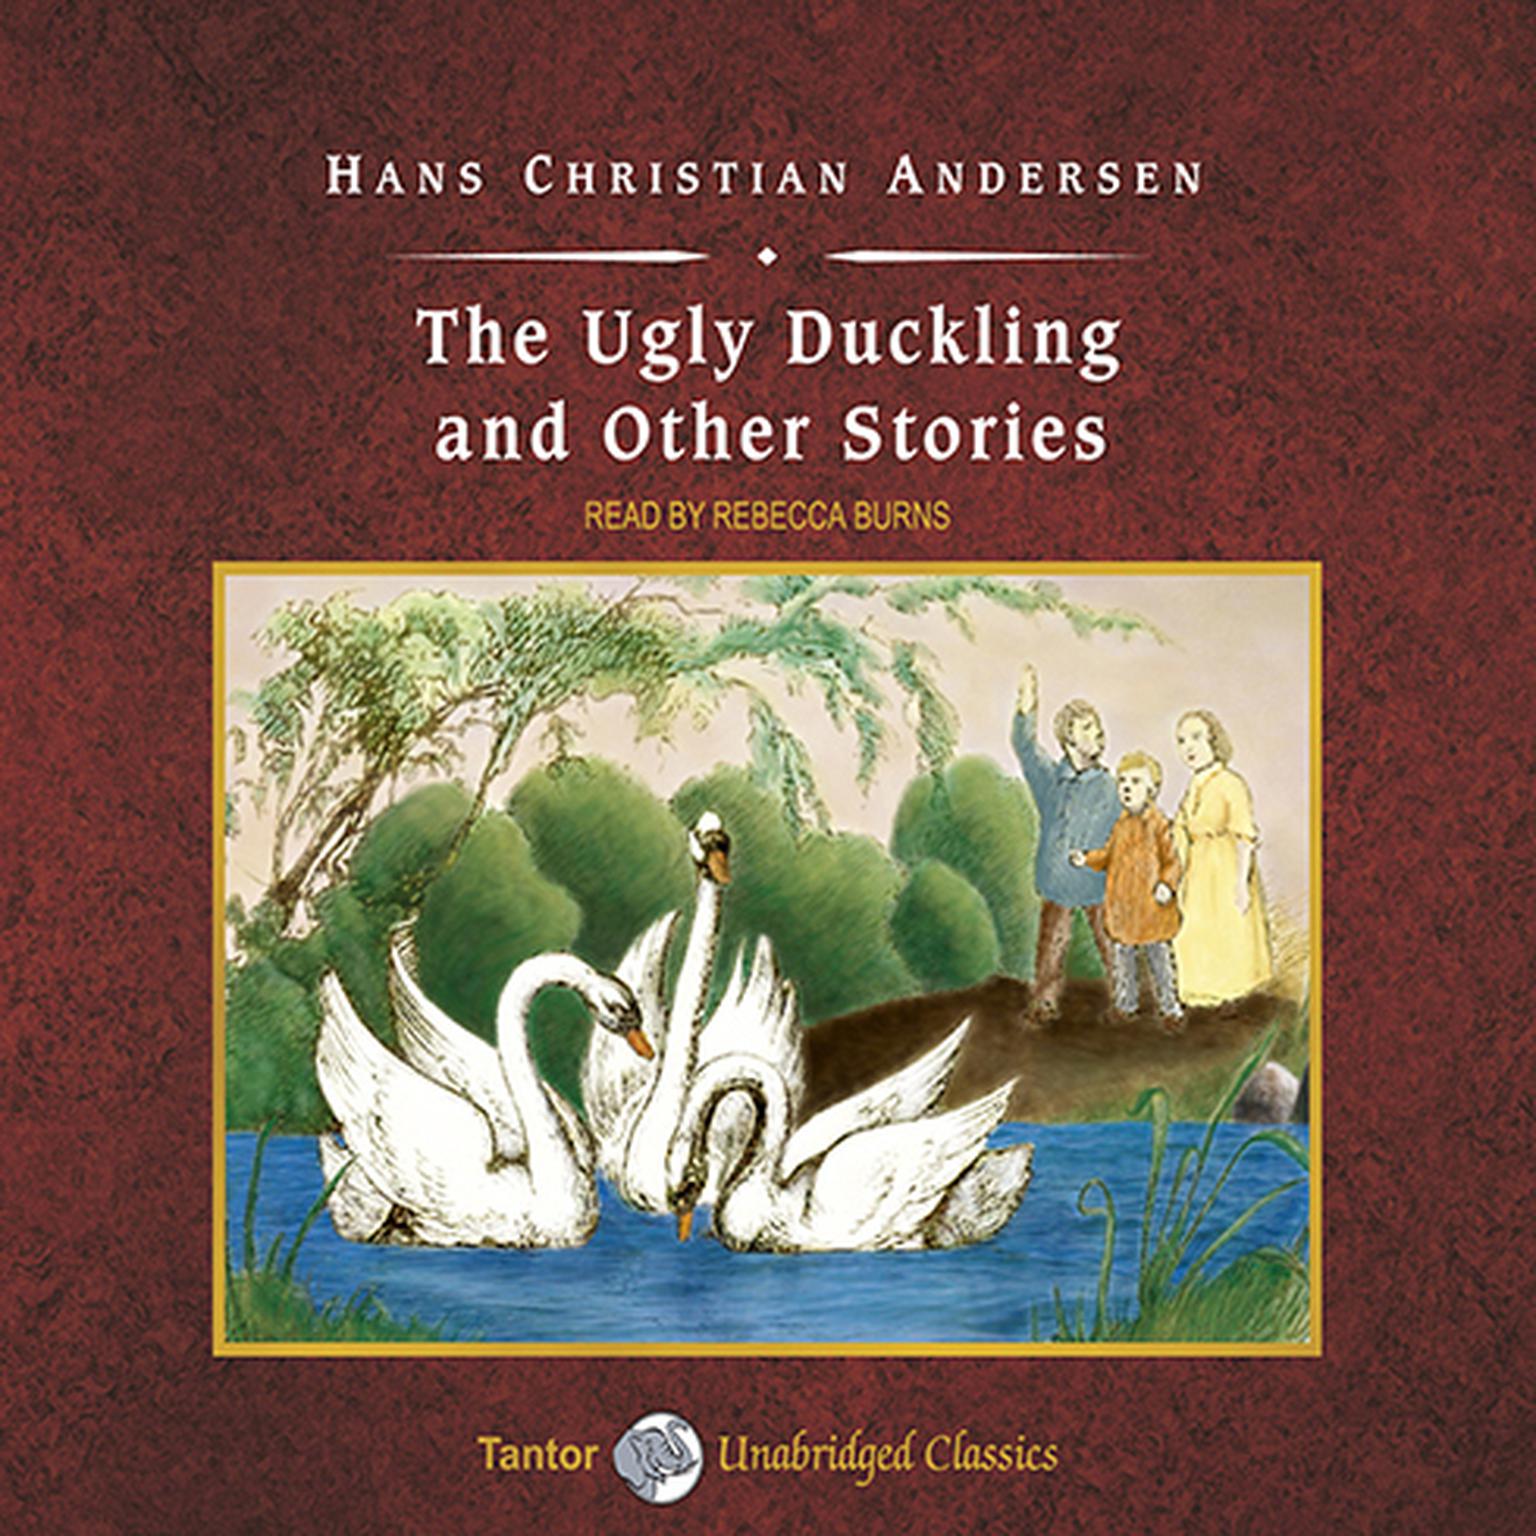 The Ugly Duckling and Other Stories, with eBook Audiobook, by Hans Christian Andersen